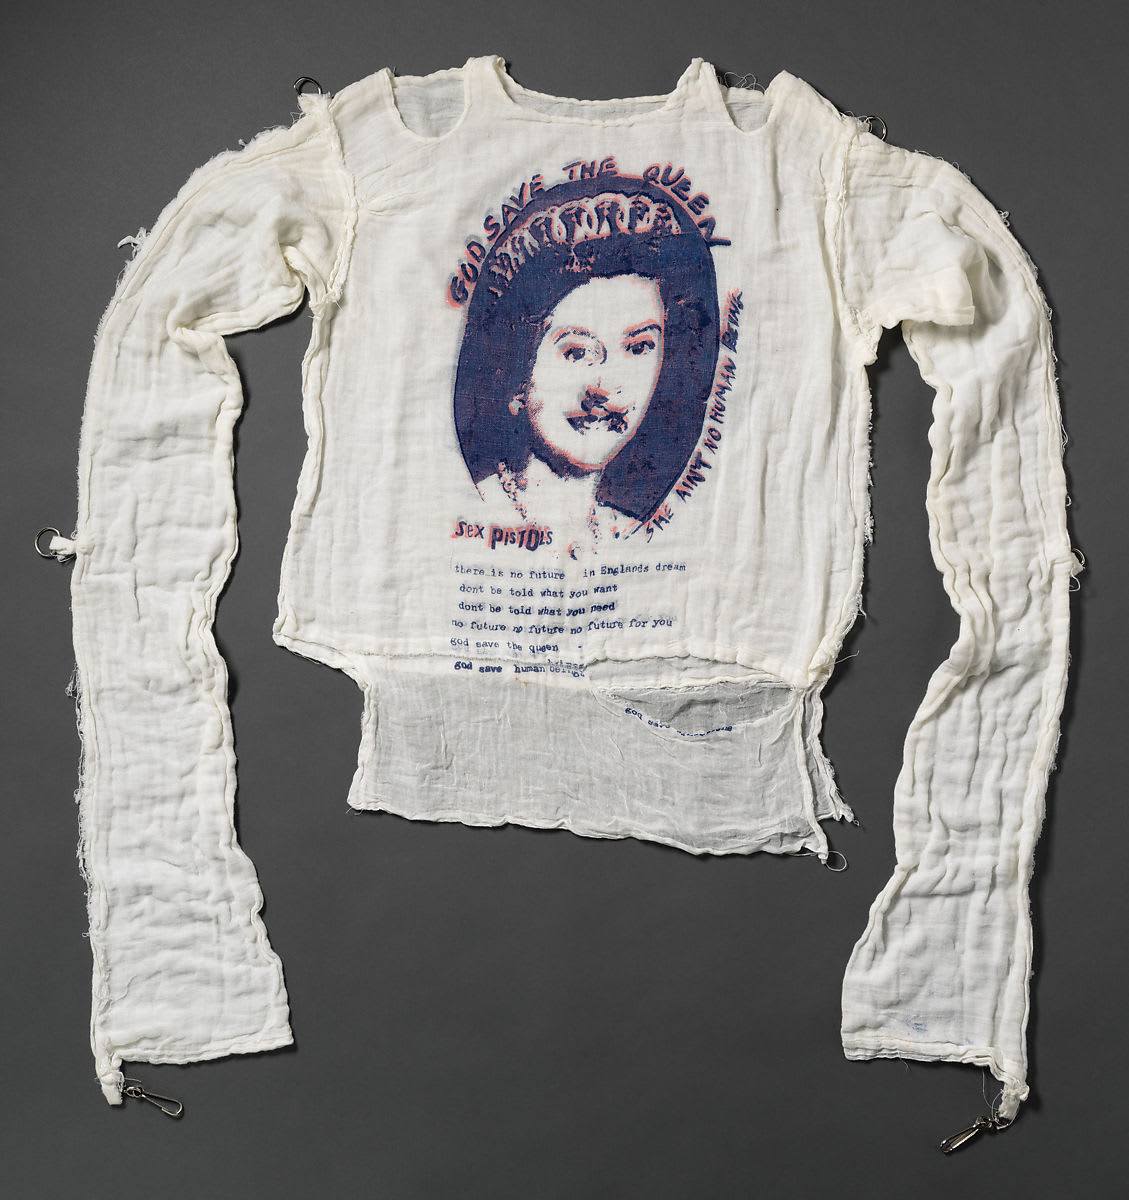 Vivienne Westwood and Malcom Mclaren’s 1977 “God Save the Queen” t-shirt features a bold graphic of Queen Elizabeth II by Jamie Reid, and became an iconic representation of early British Punk style and anti-fashion. Read more!